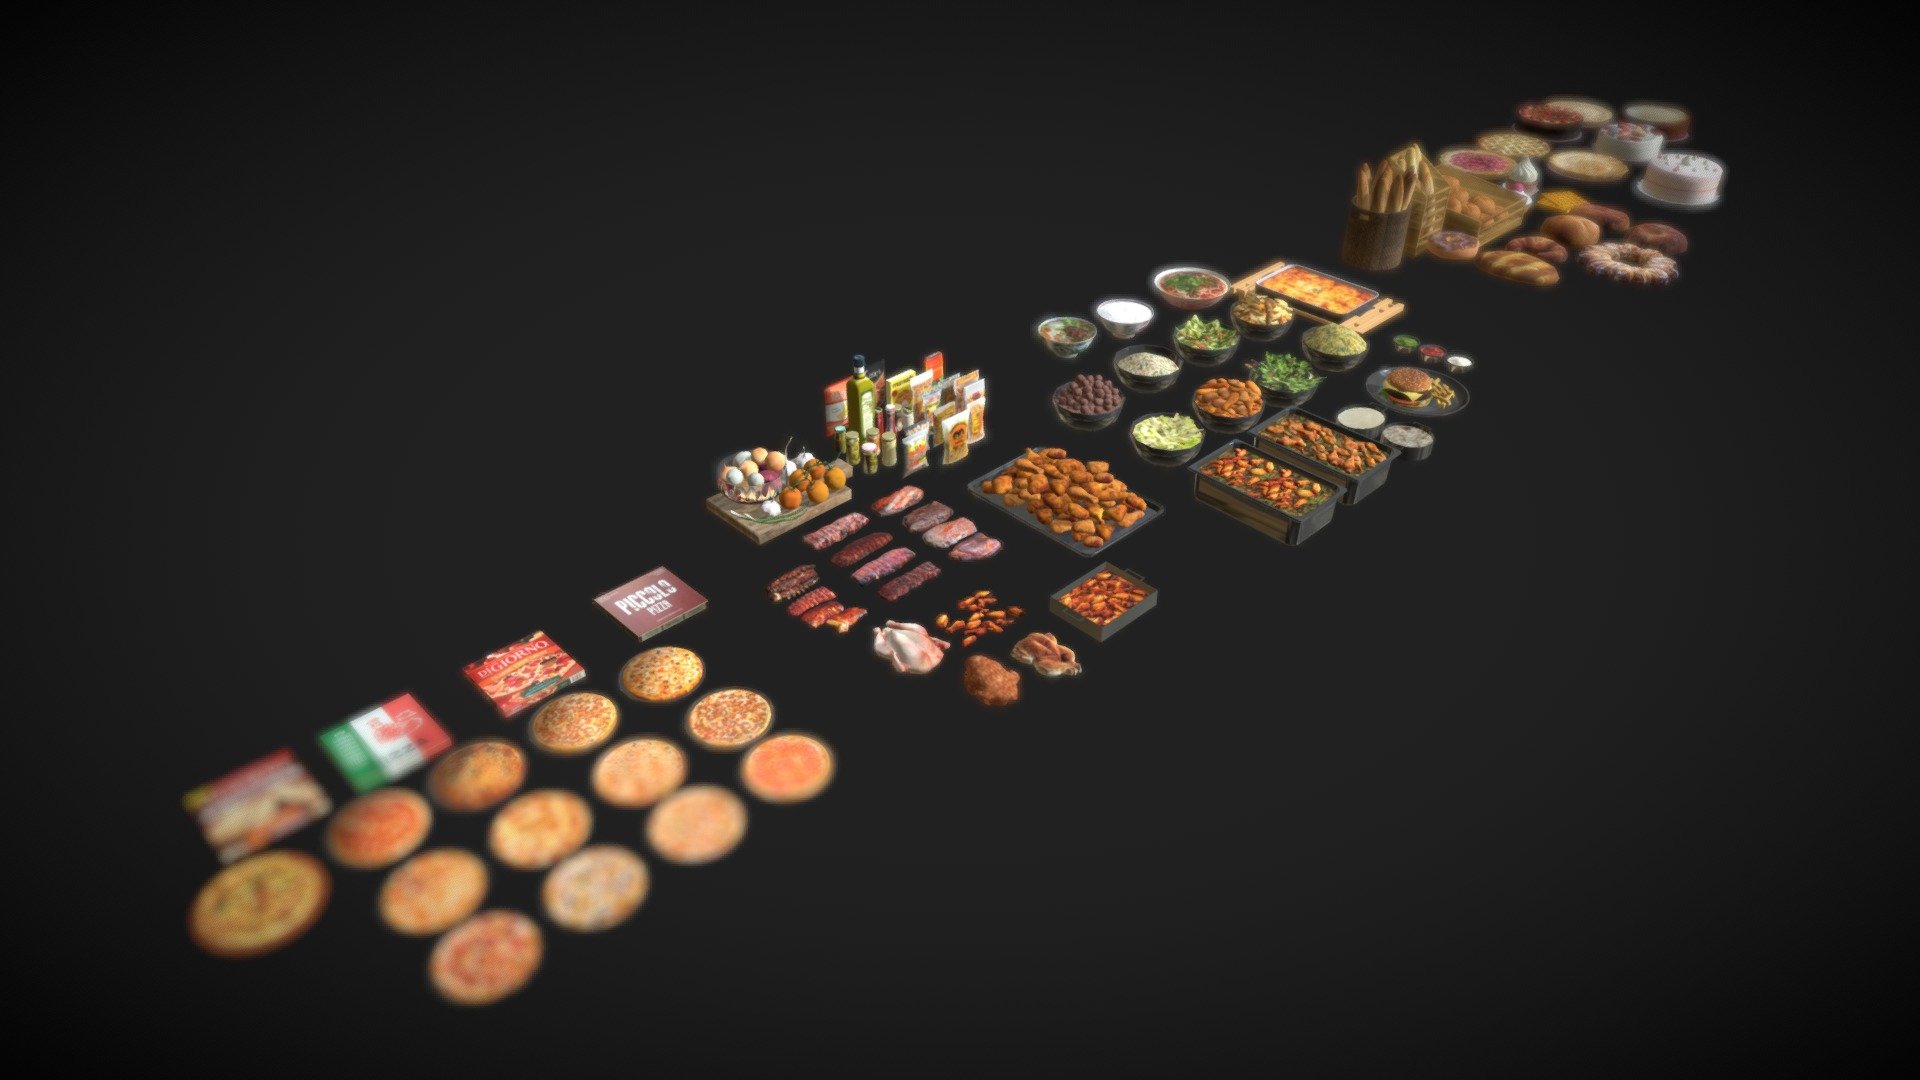 Hello everyone🖐, this pack of models was created in Blender 3.3. All models are low-poly😊, but based on real textures. You can use them for video games or simply for scene decoration, etc.

There are different categories of food in this file (100 in total):

-pizza
-meat
-bread and cakes
-foods, soup&hellip;

If you have any questions or comments, please don't hesitate to let me know. Other packs will be available soon 😋 3d model